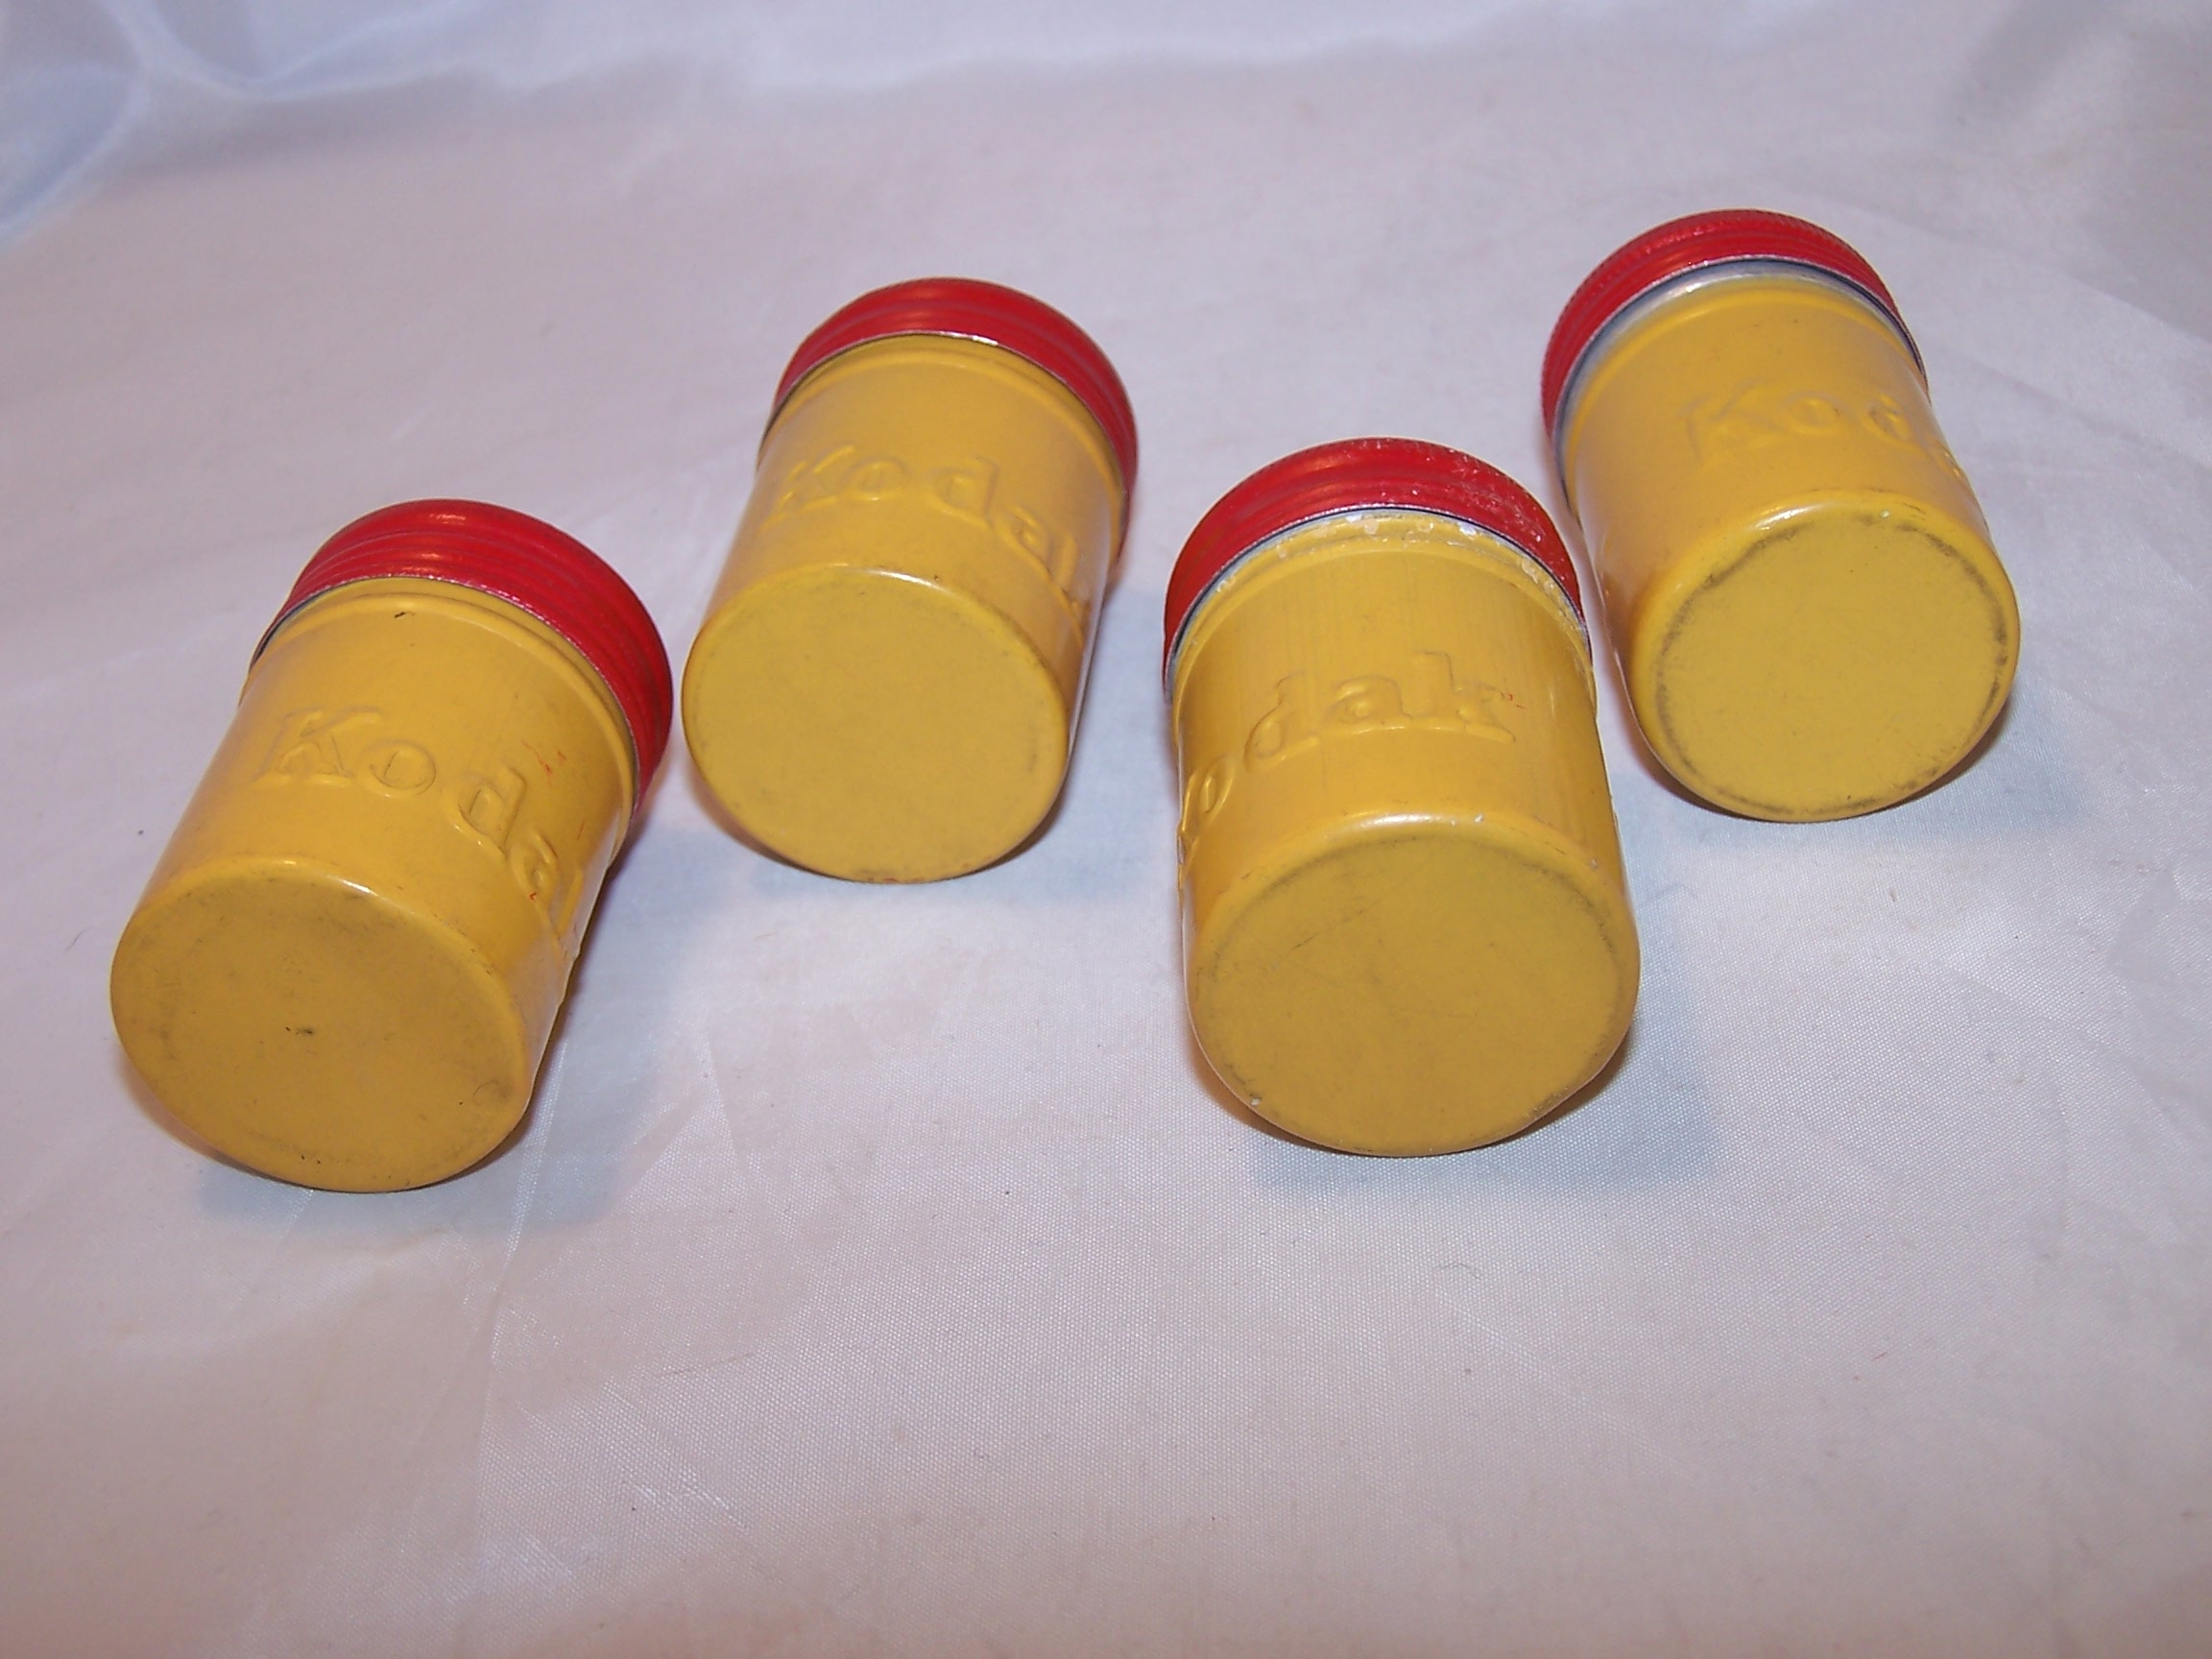 Image 2 of Kodak Red and Gold Film Canister, Vintage, Geo Caching